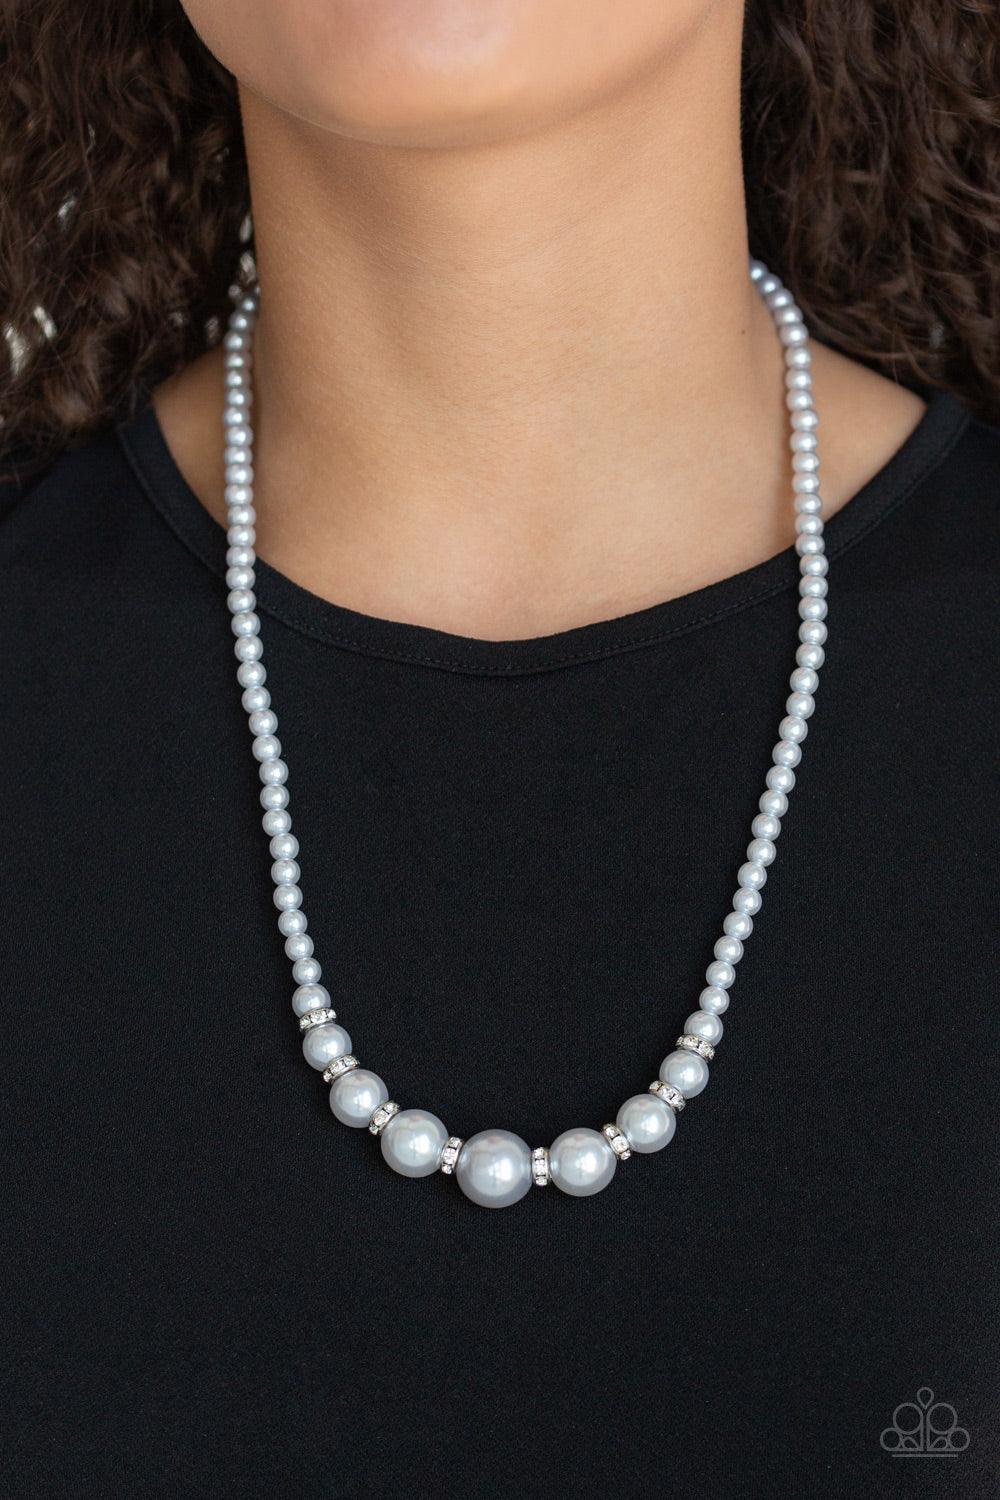 Paparazzi Accessories-SoHo Sweetheart - Silver Necklace